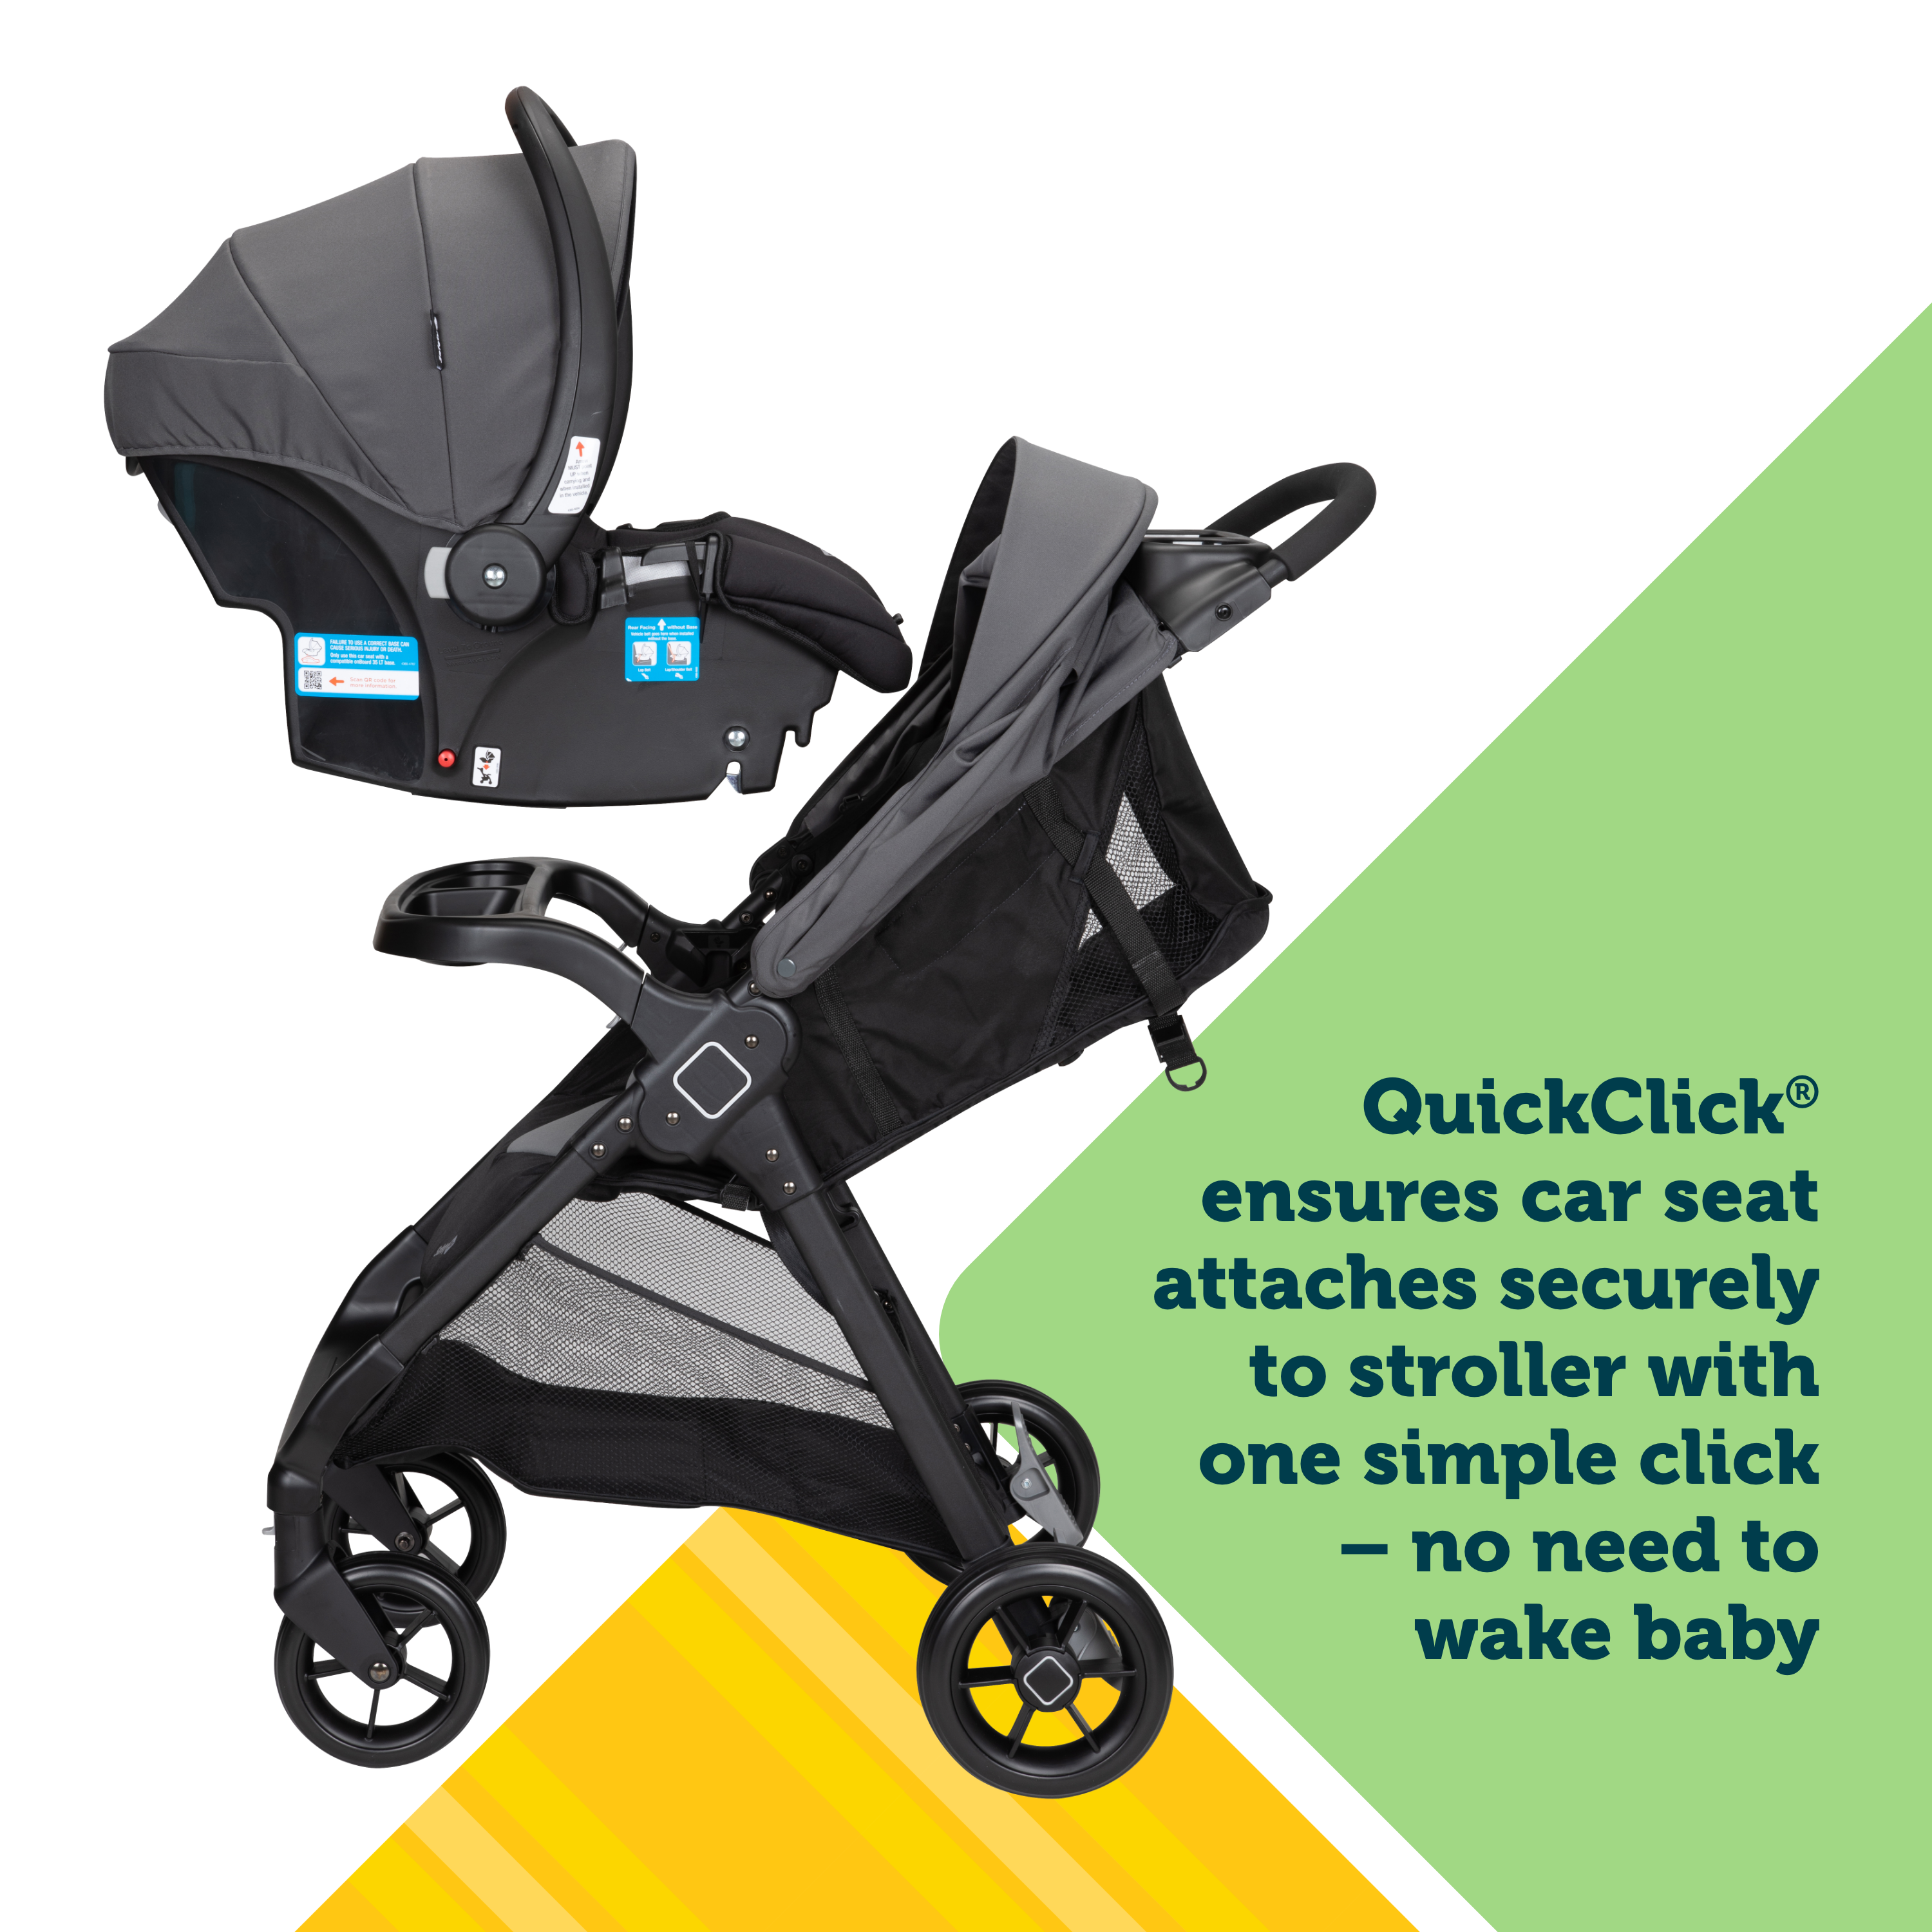 Smooth Ride Travel System - QuickClick ensures car seat attaches securely to stroller with one simple click - no need to wake baby